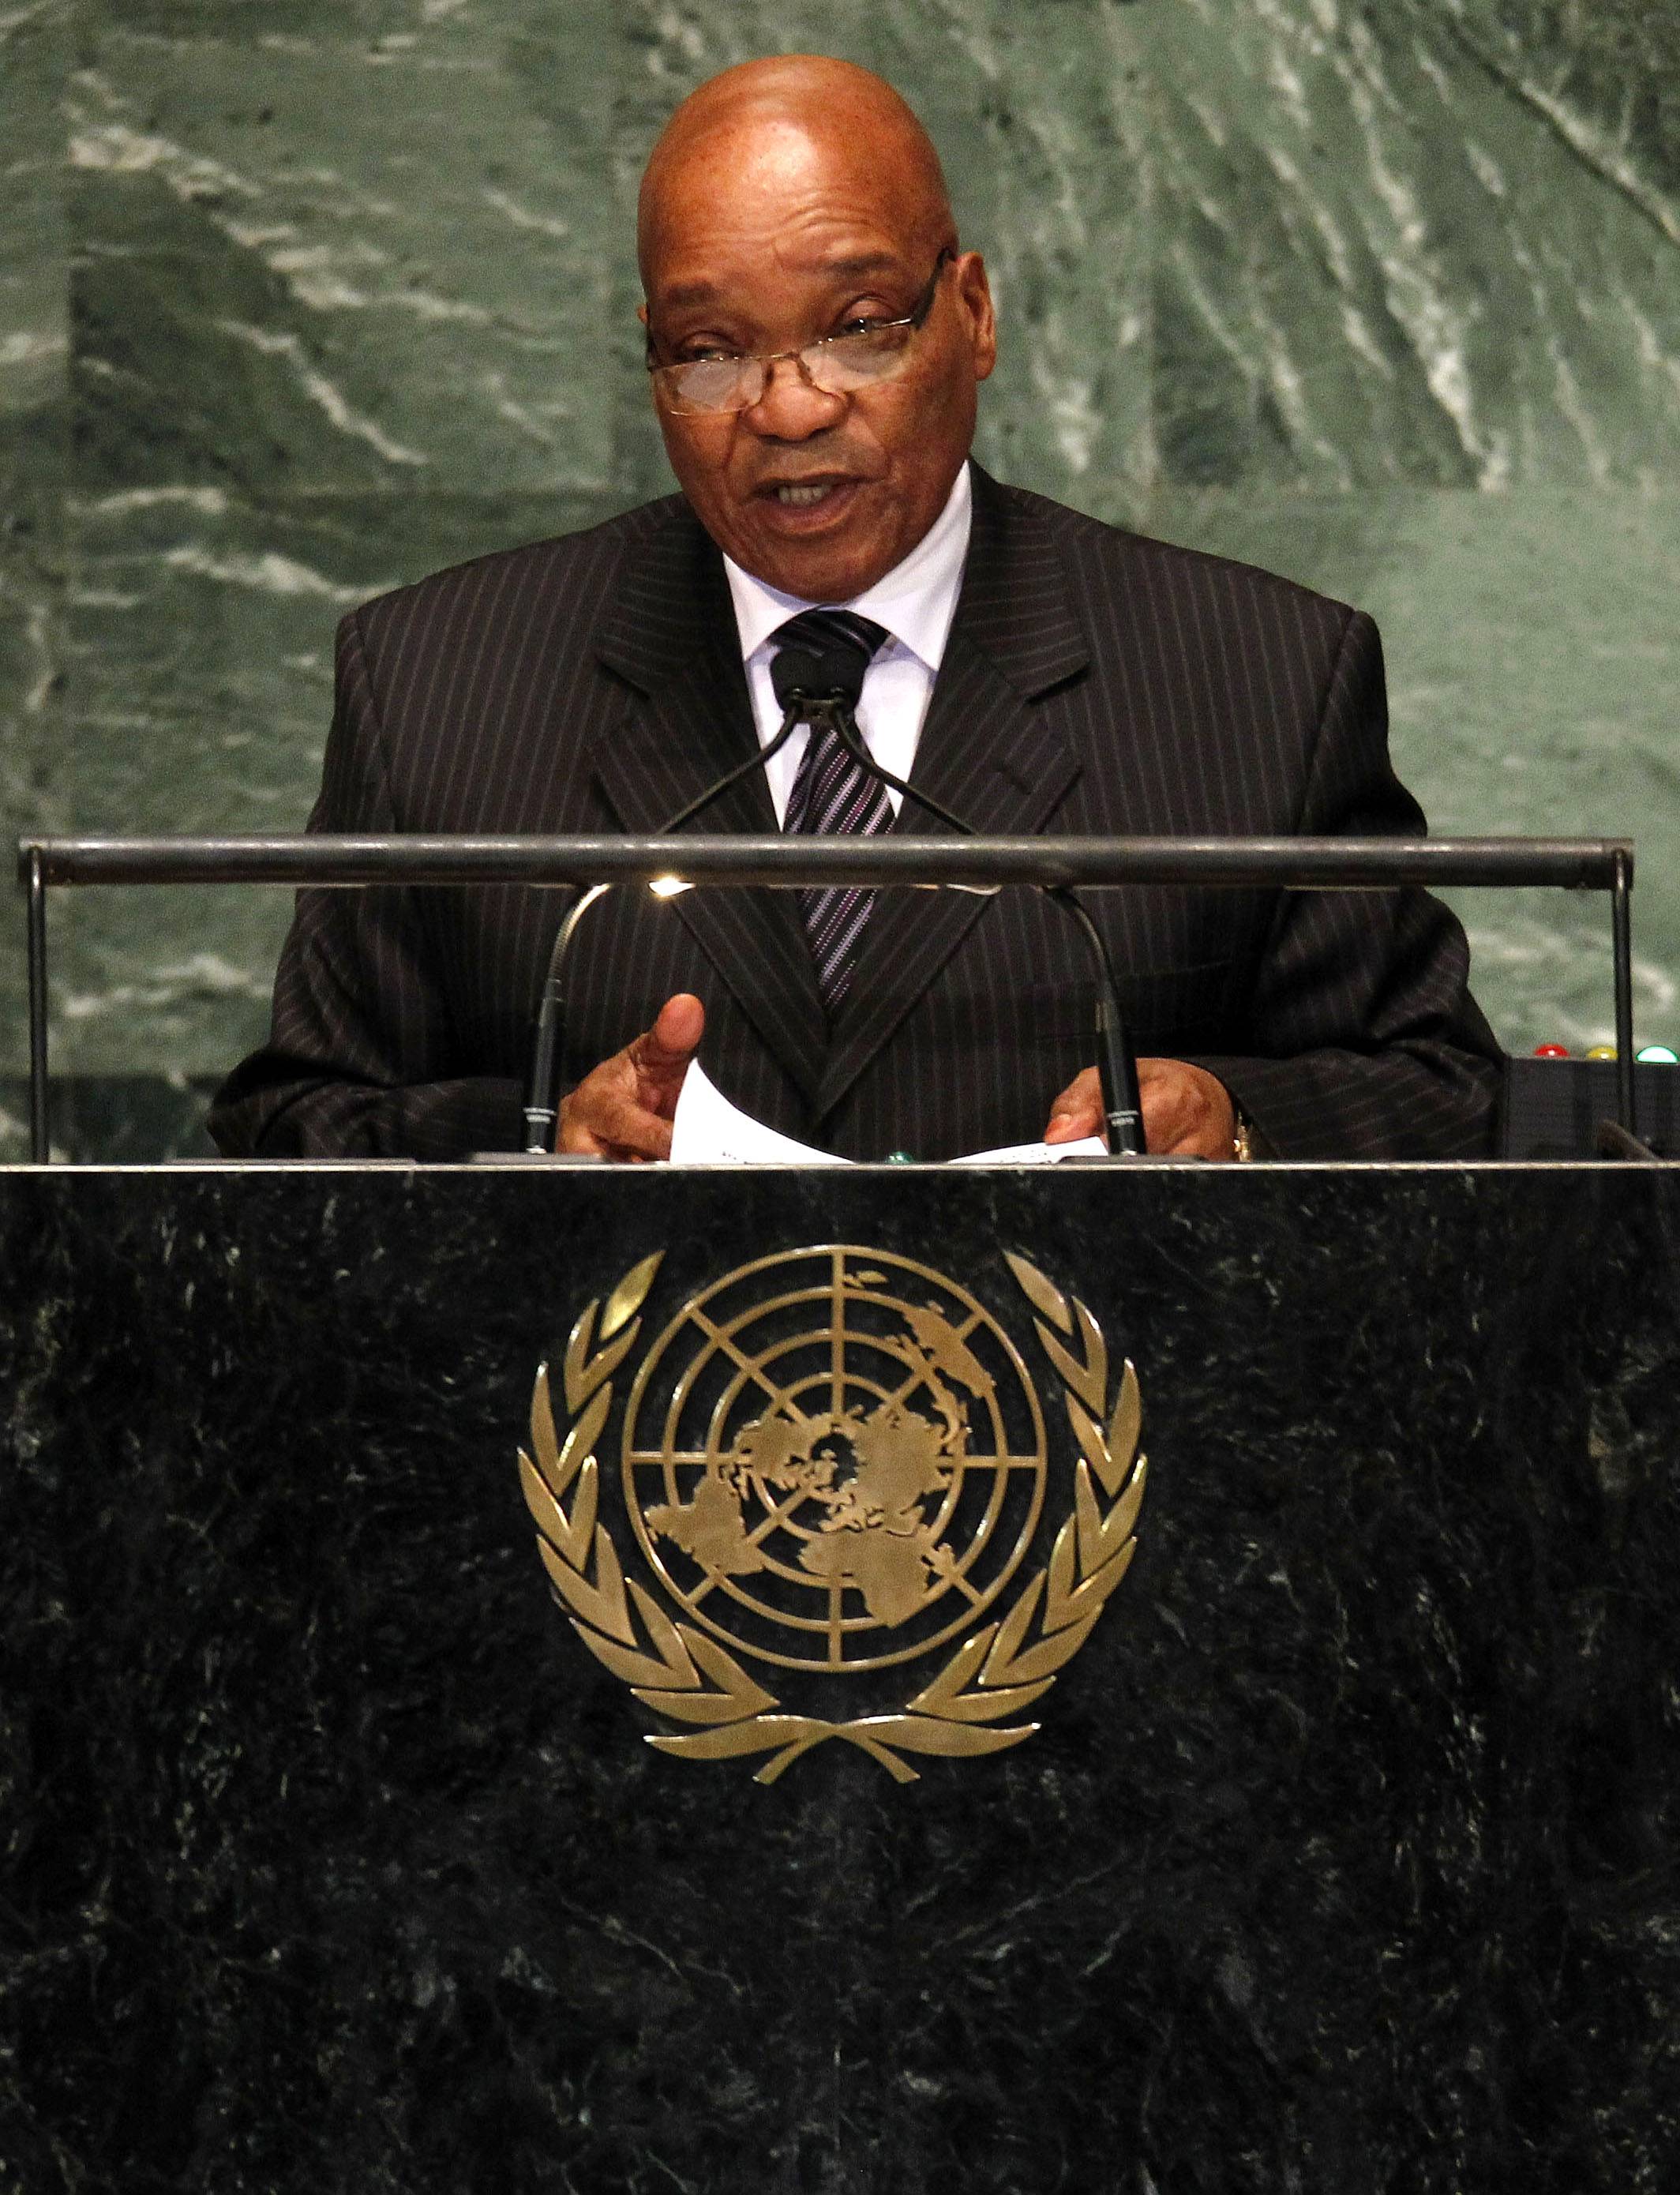 Jacob Zuma, President of South Africa - When Nelson Mandela died last year, Obama was one of many leaders invited to speak at his service. South Africa plays a major political role in Africa. If the U.S can build relations with them, maybe relations with other African nations could be enhanced as well.(Photo: Jeff Zelevansky/Getty Images)